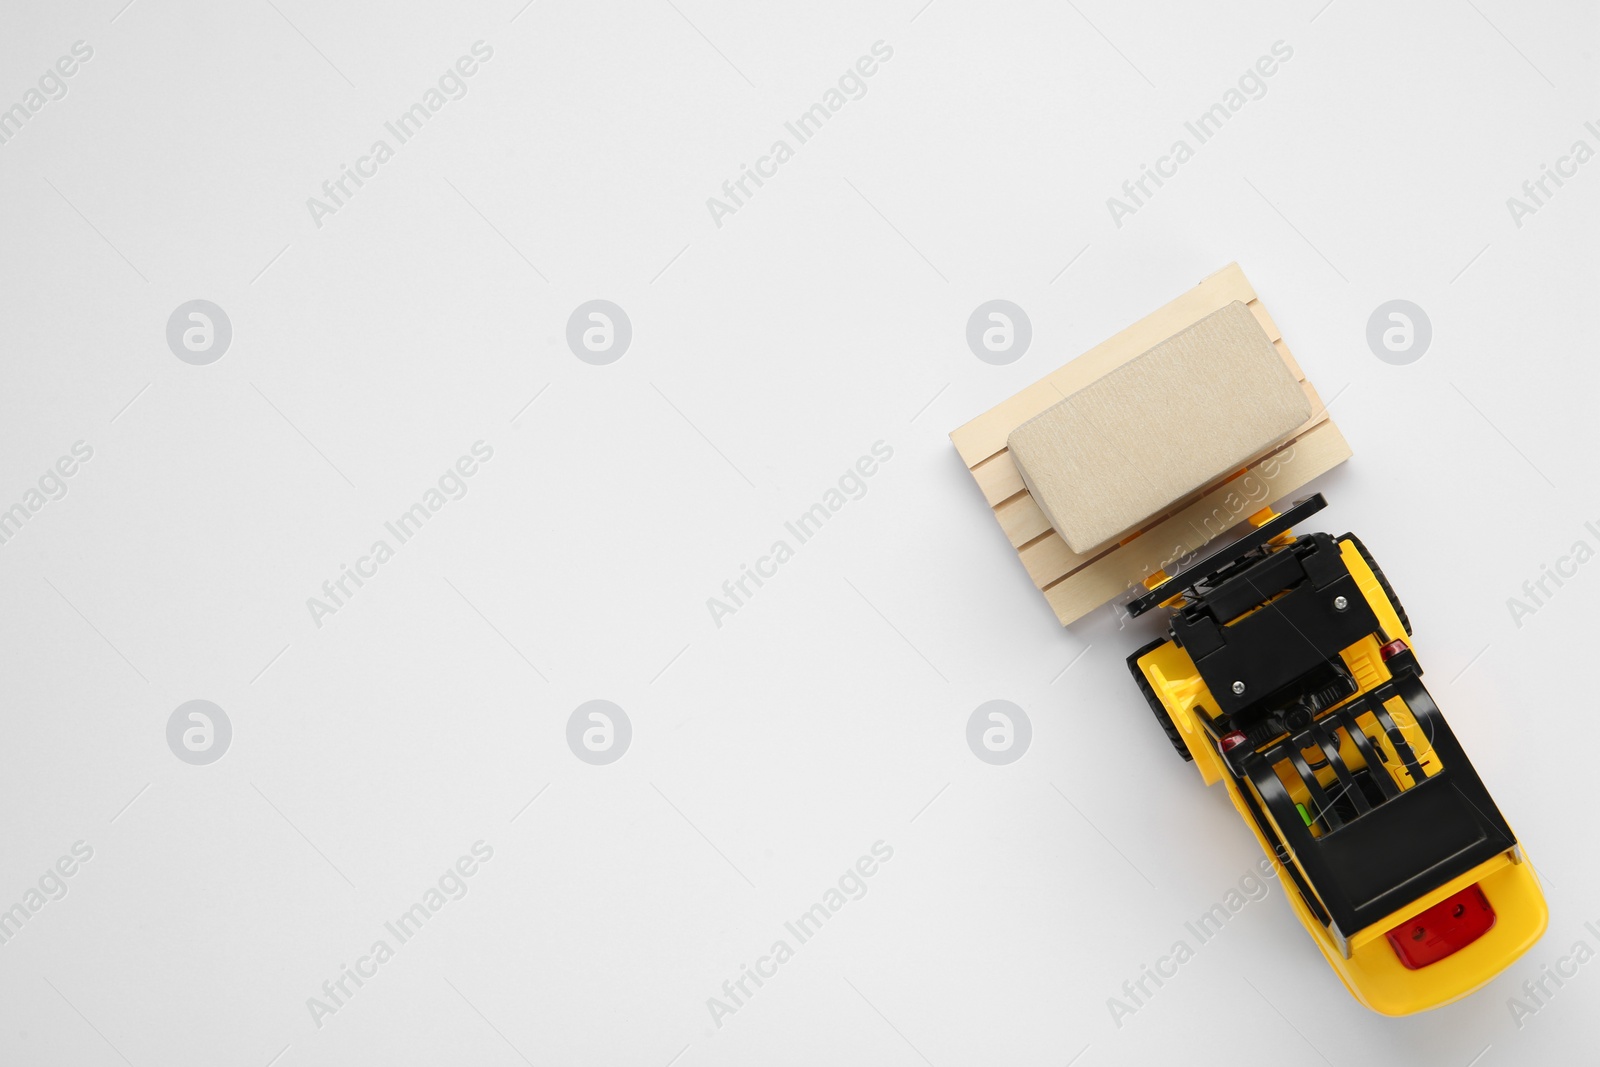 Photo of Toy forklift with wooden pallet and box on white background, top view